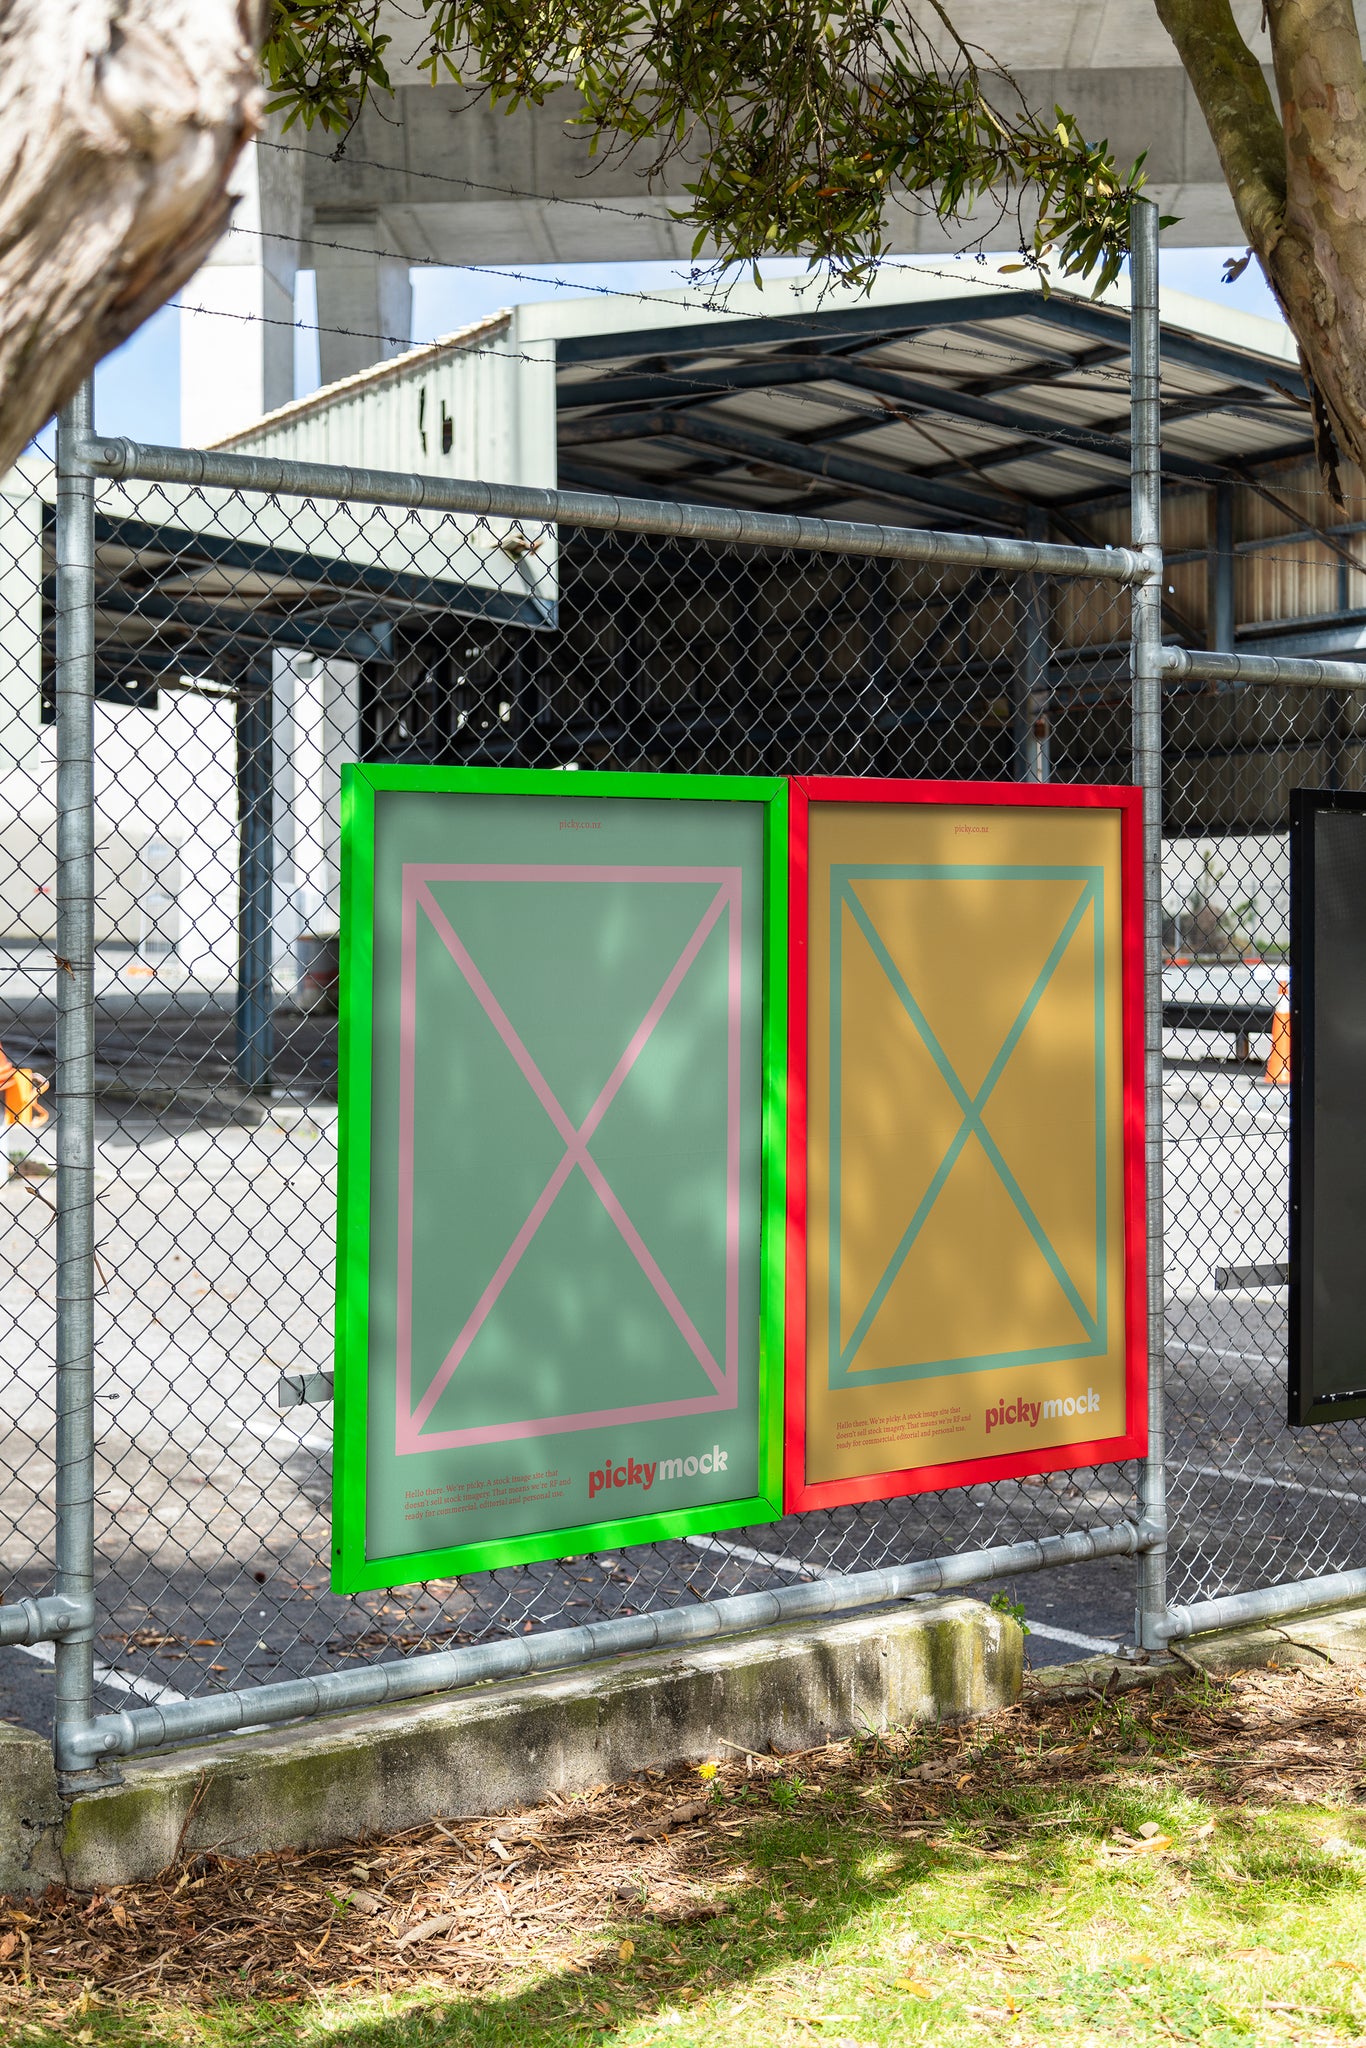 Portrait of colorful advertisement frames on a wire fence sheltered by trees, the frame holds green and yellow mock advertisements with a small red picky logo.